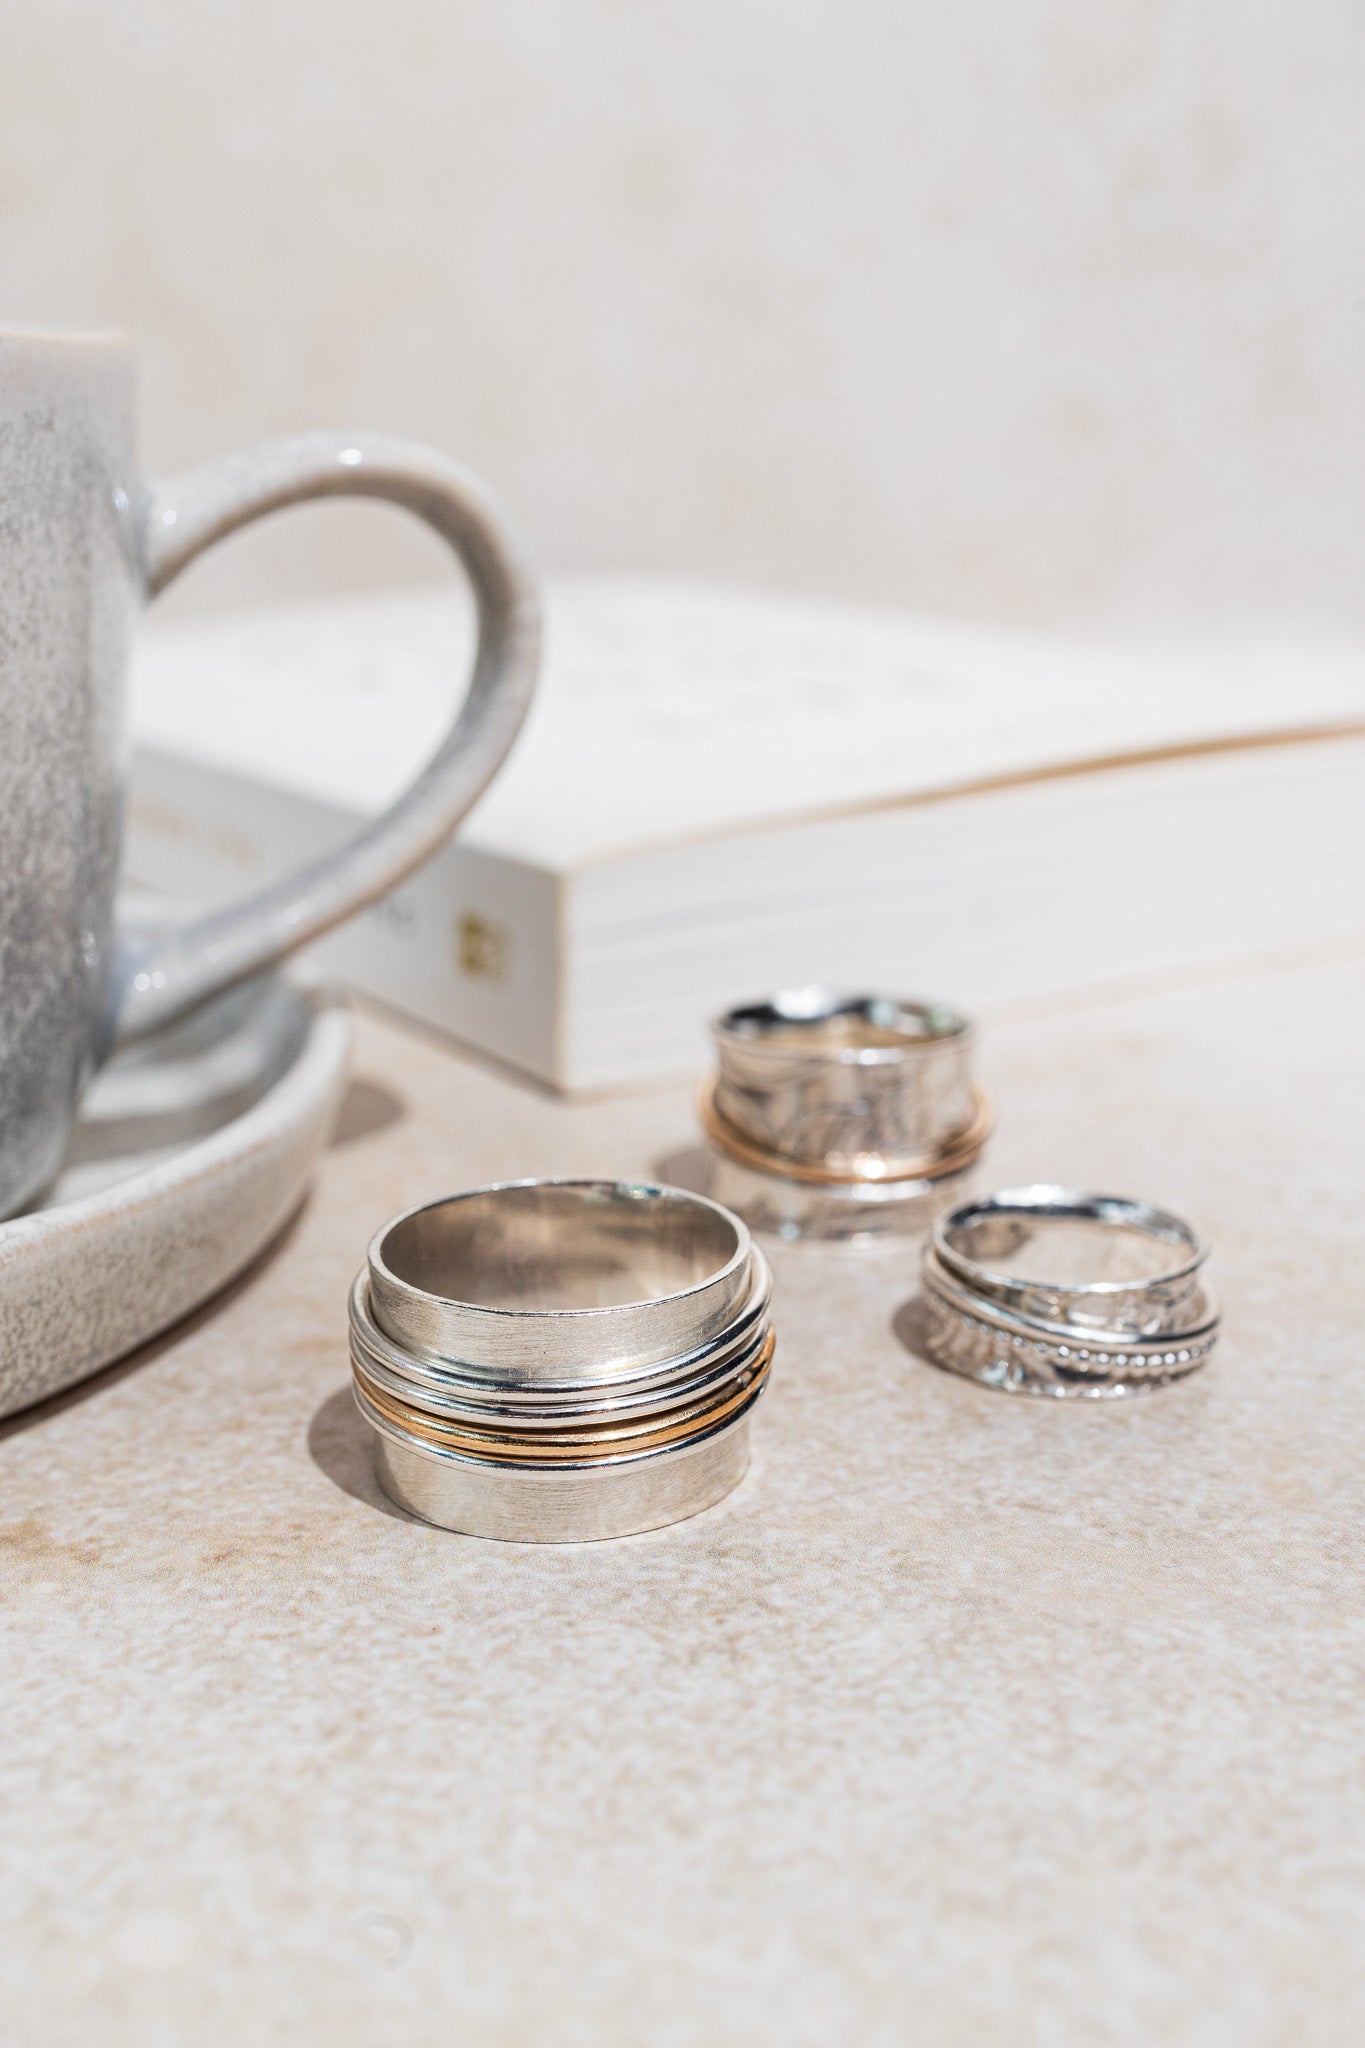 stg silver spinner ring one thick band 8mm wide with an imprinted paisley pattern. Over it spins a silver beaded thin ring 1.5mm wide. The outer ring spins with your touch pictured here with a book and a mug